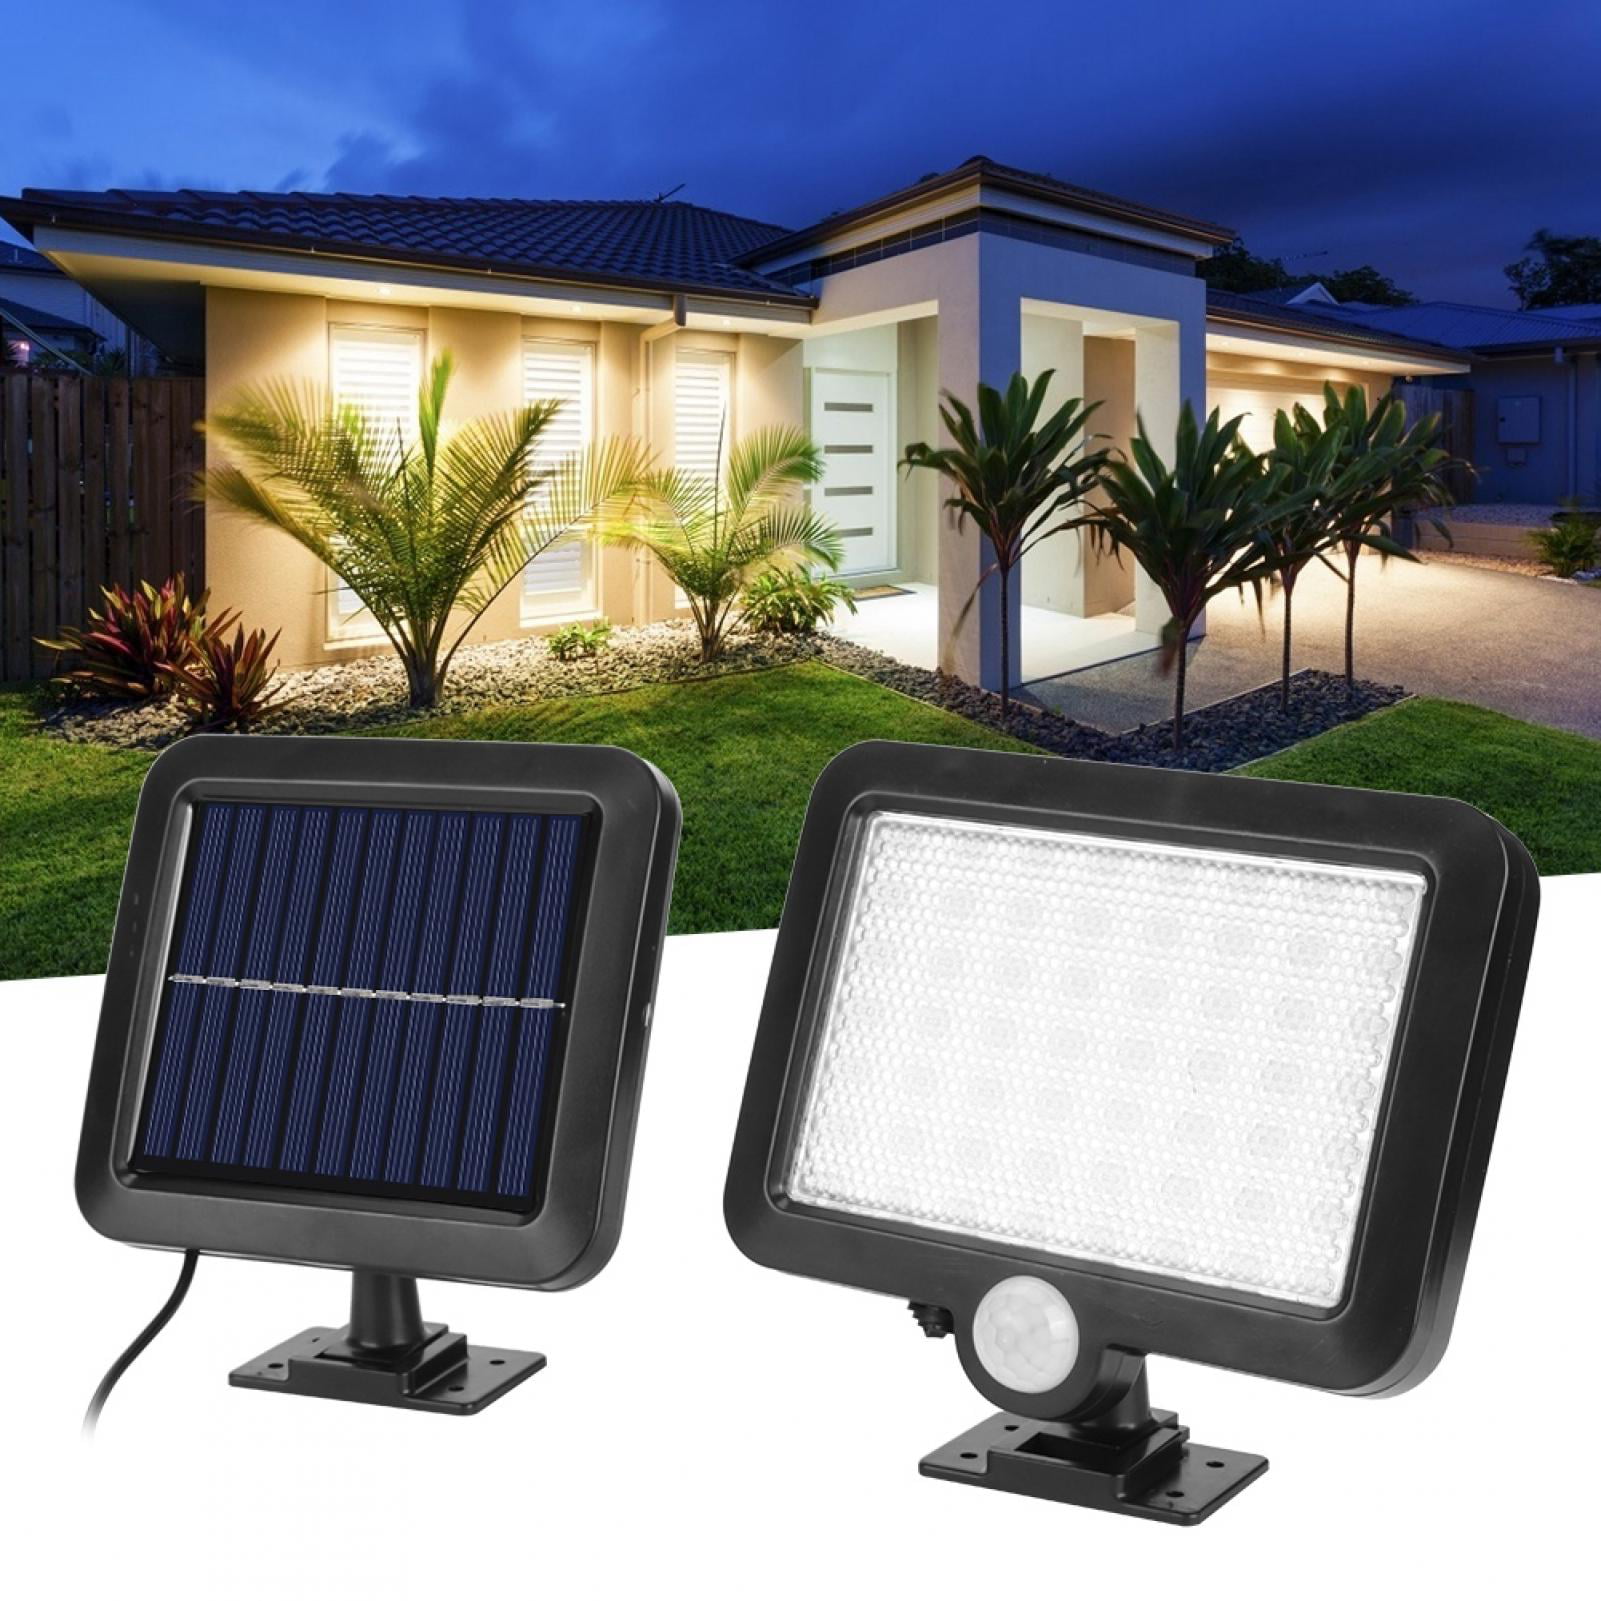 Waterproof Human Body Induction Solar Powered Wall Lamp 100 LED Spotlight Solar Lights Outdoor 5 m/ 16.4 ft Cord Easy-to-Install Security Lights with Adjustable Solar Panel for Garden Garage